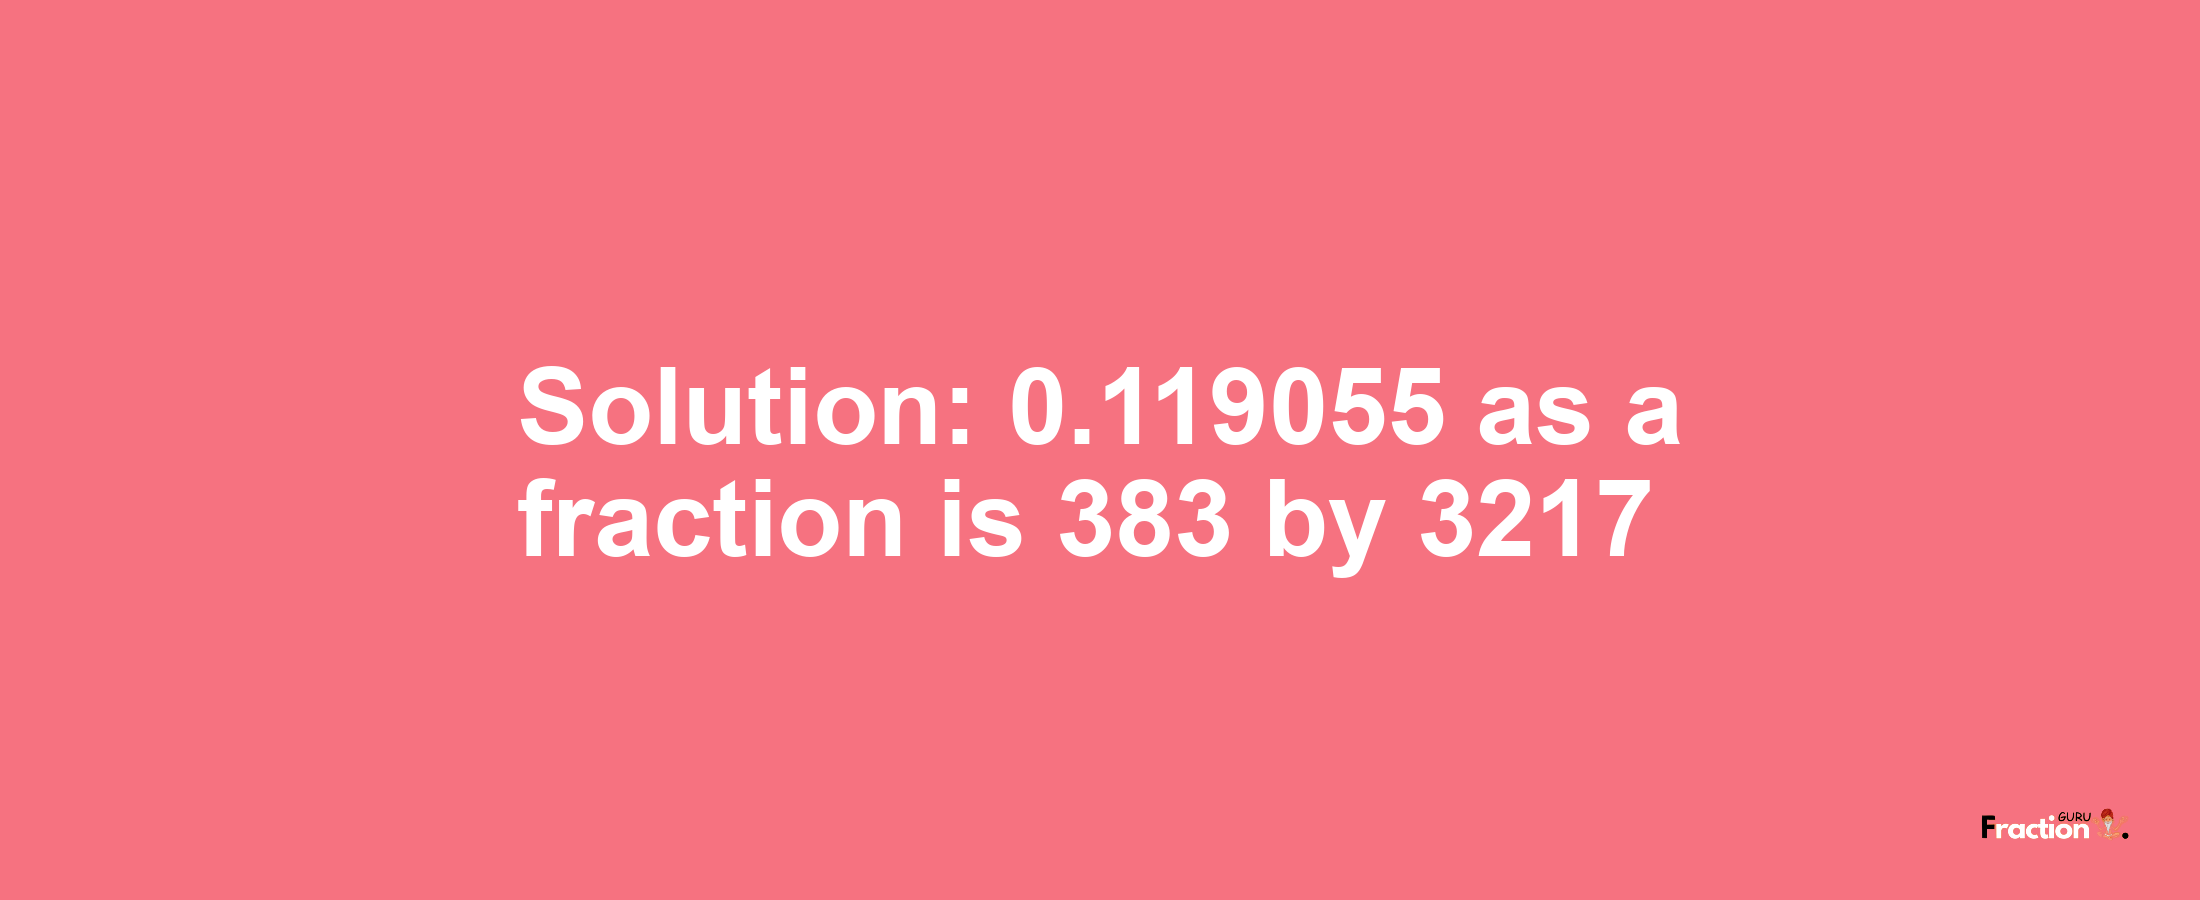 Solution:0.119055 as a fraction is 383/3217